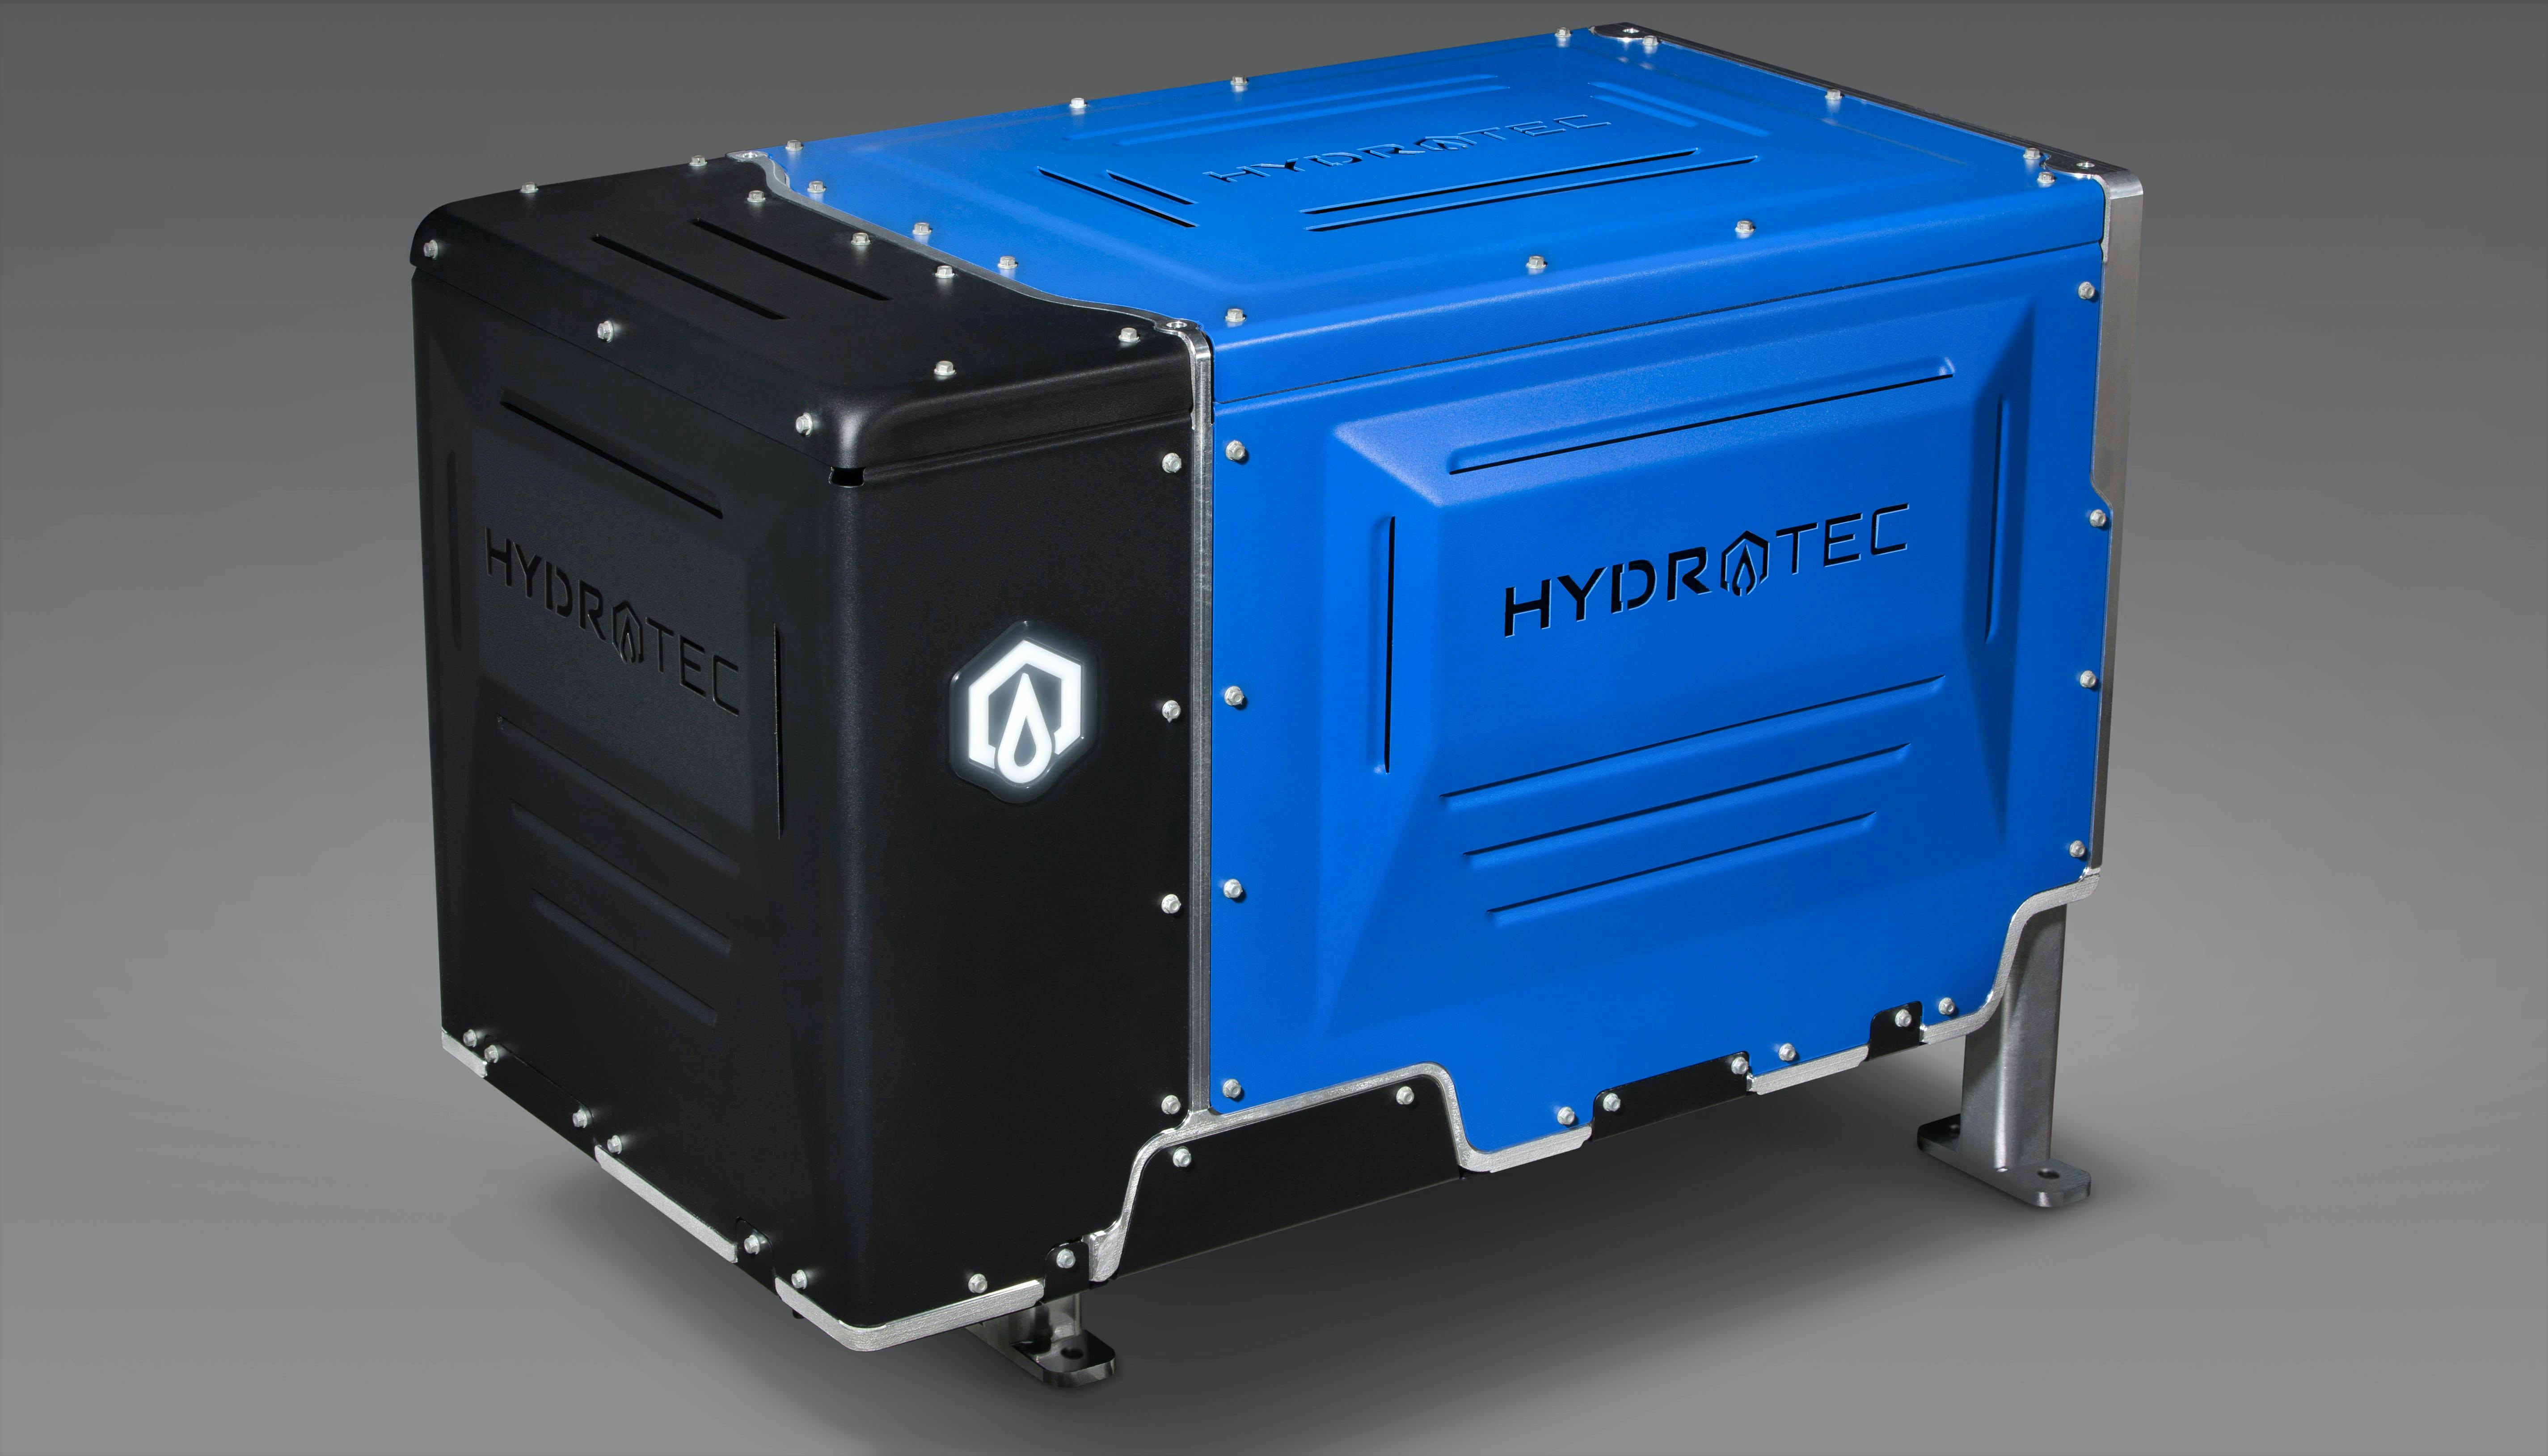 General Motors&rsquo; Hydrotec power cubes contain more than 300 fuel cells in which hydrogen and oxygen are combined to generate electricity through an electrochemical reaction.